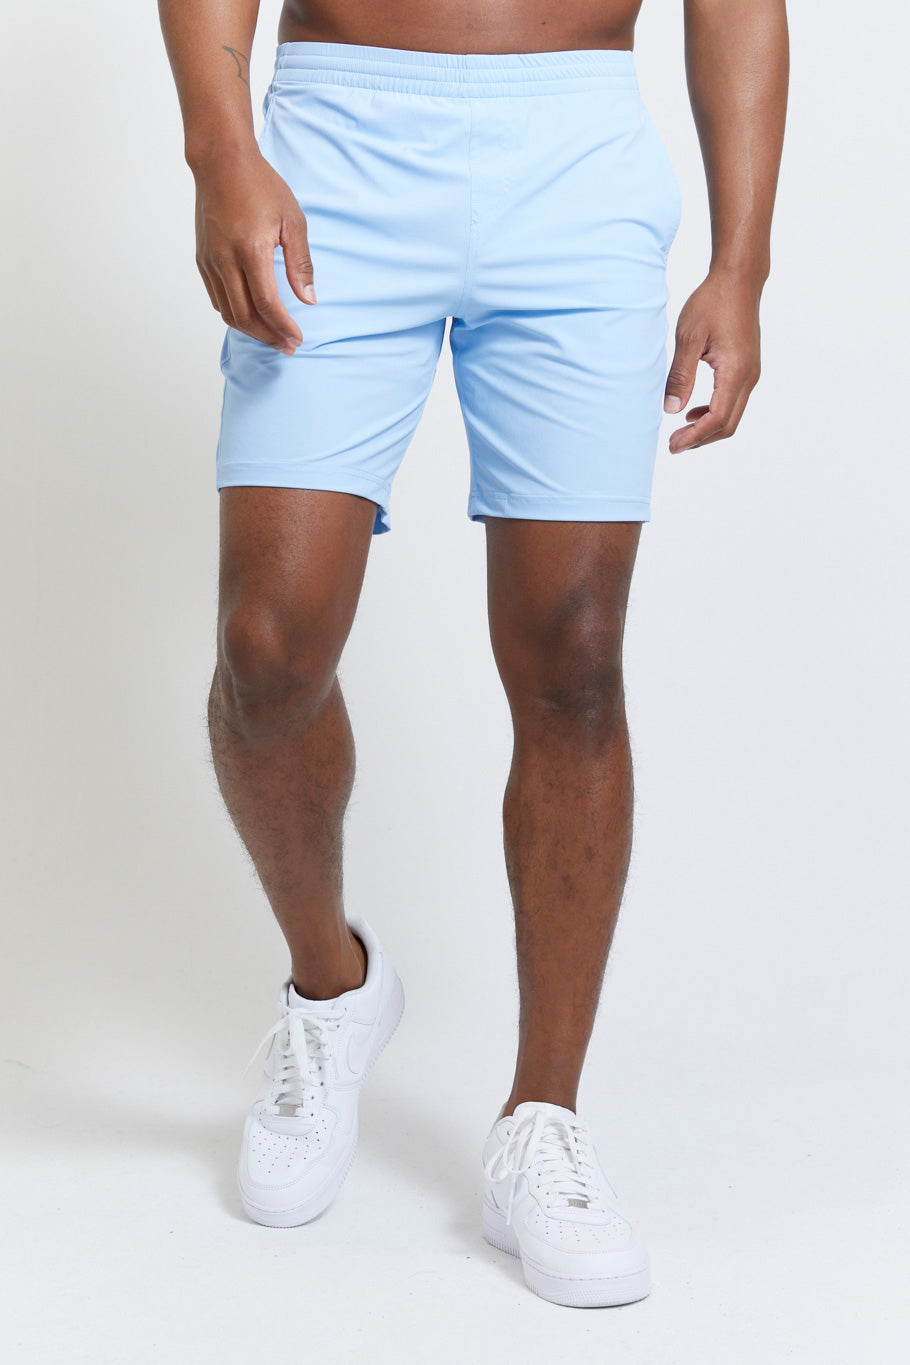 Image of the byron tennis short in skydiver